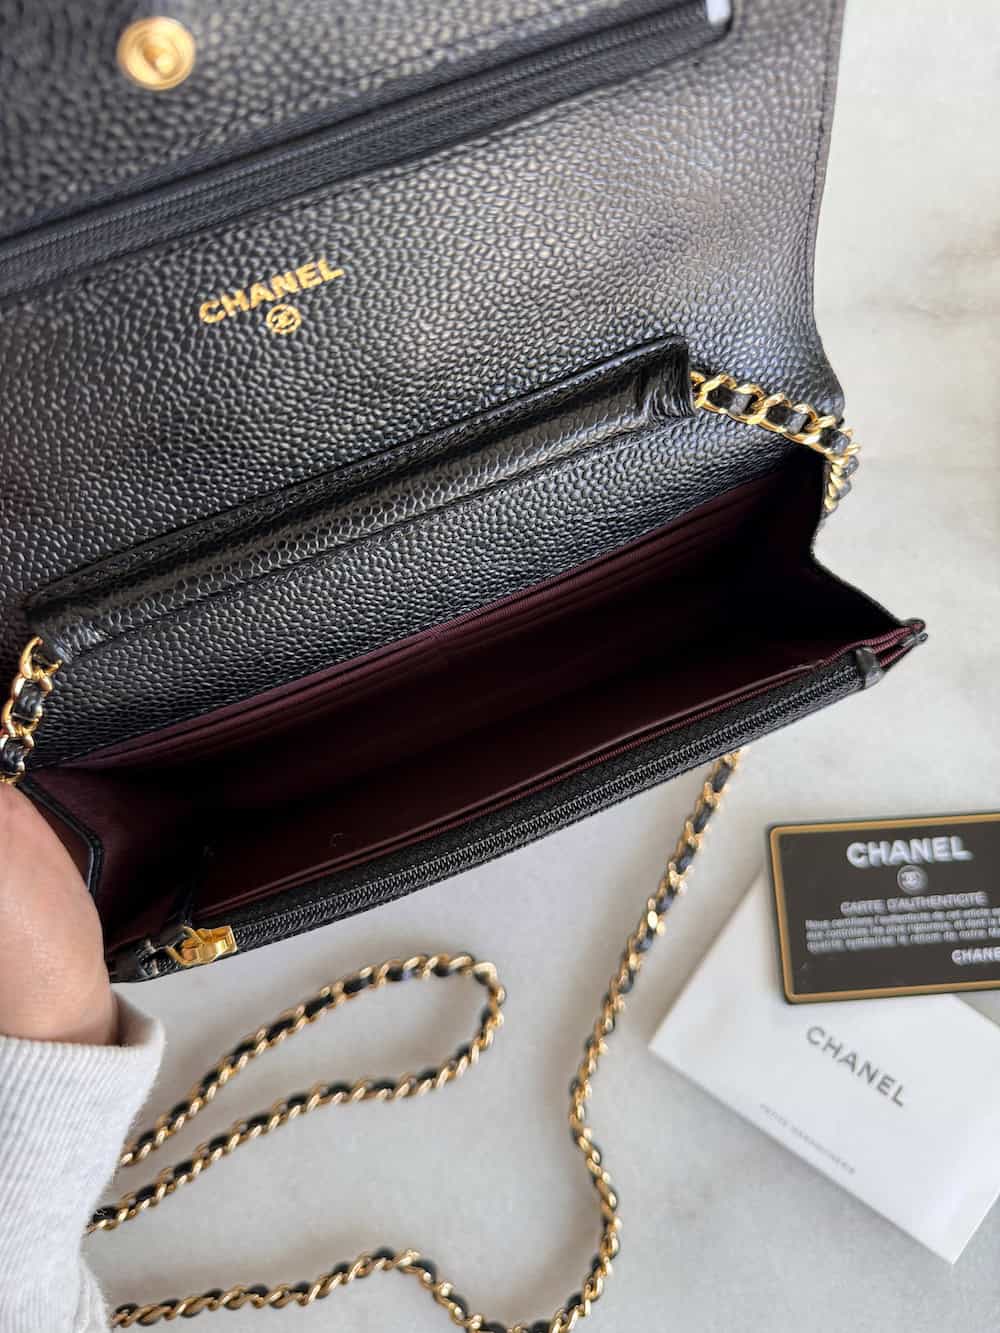 image of the inside of a Chanel WOC bag